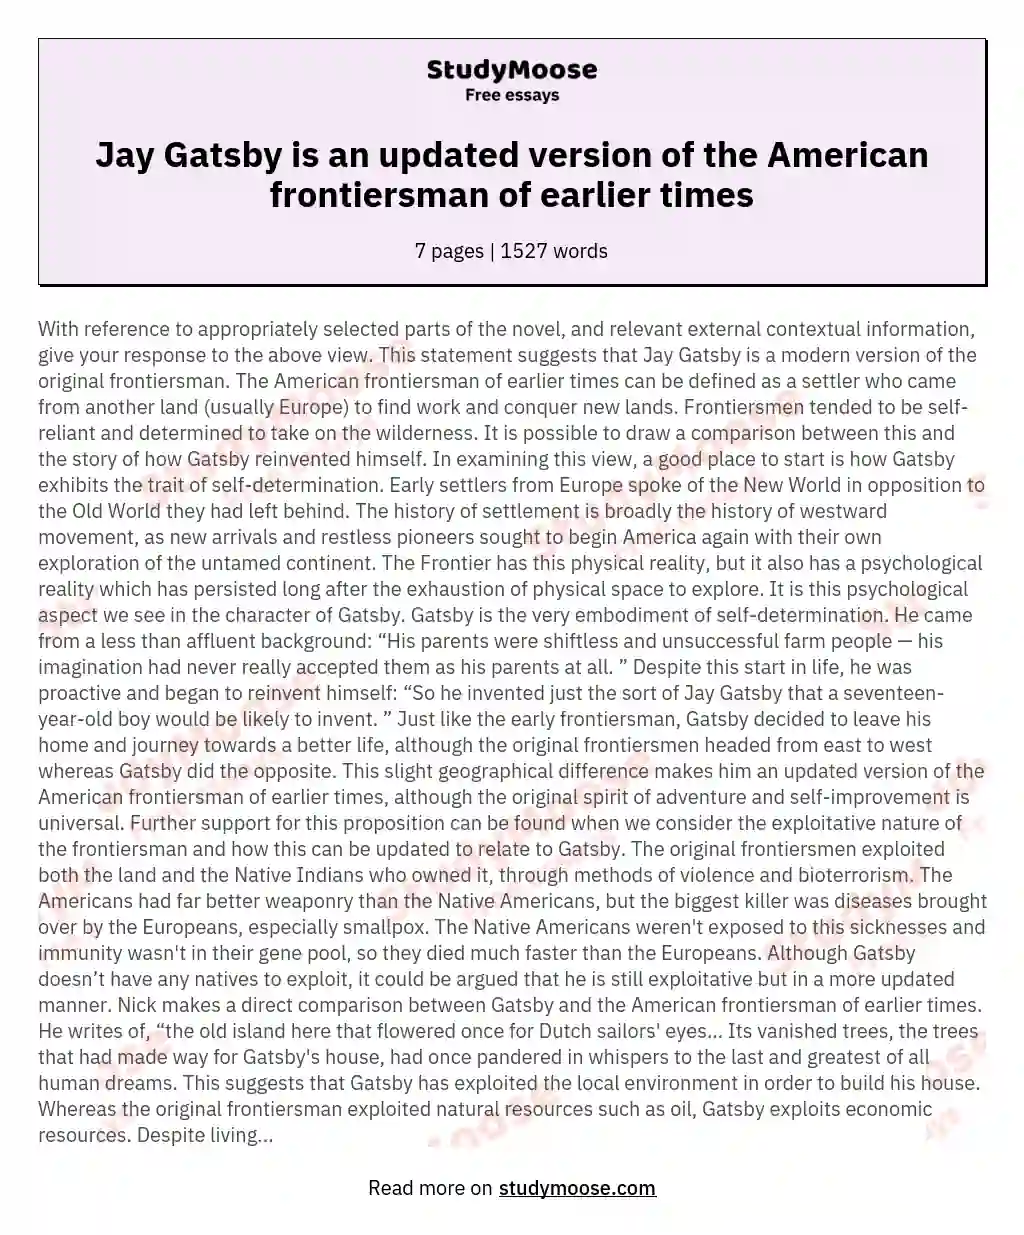 Jay Gatsby is an updated version of the American frontiersman of earlier times